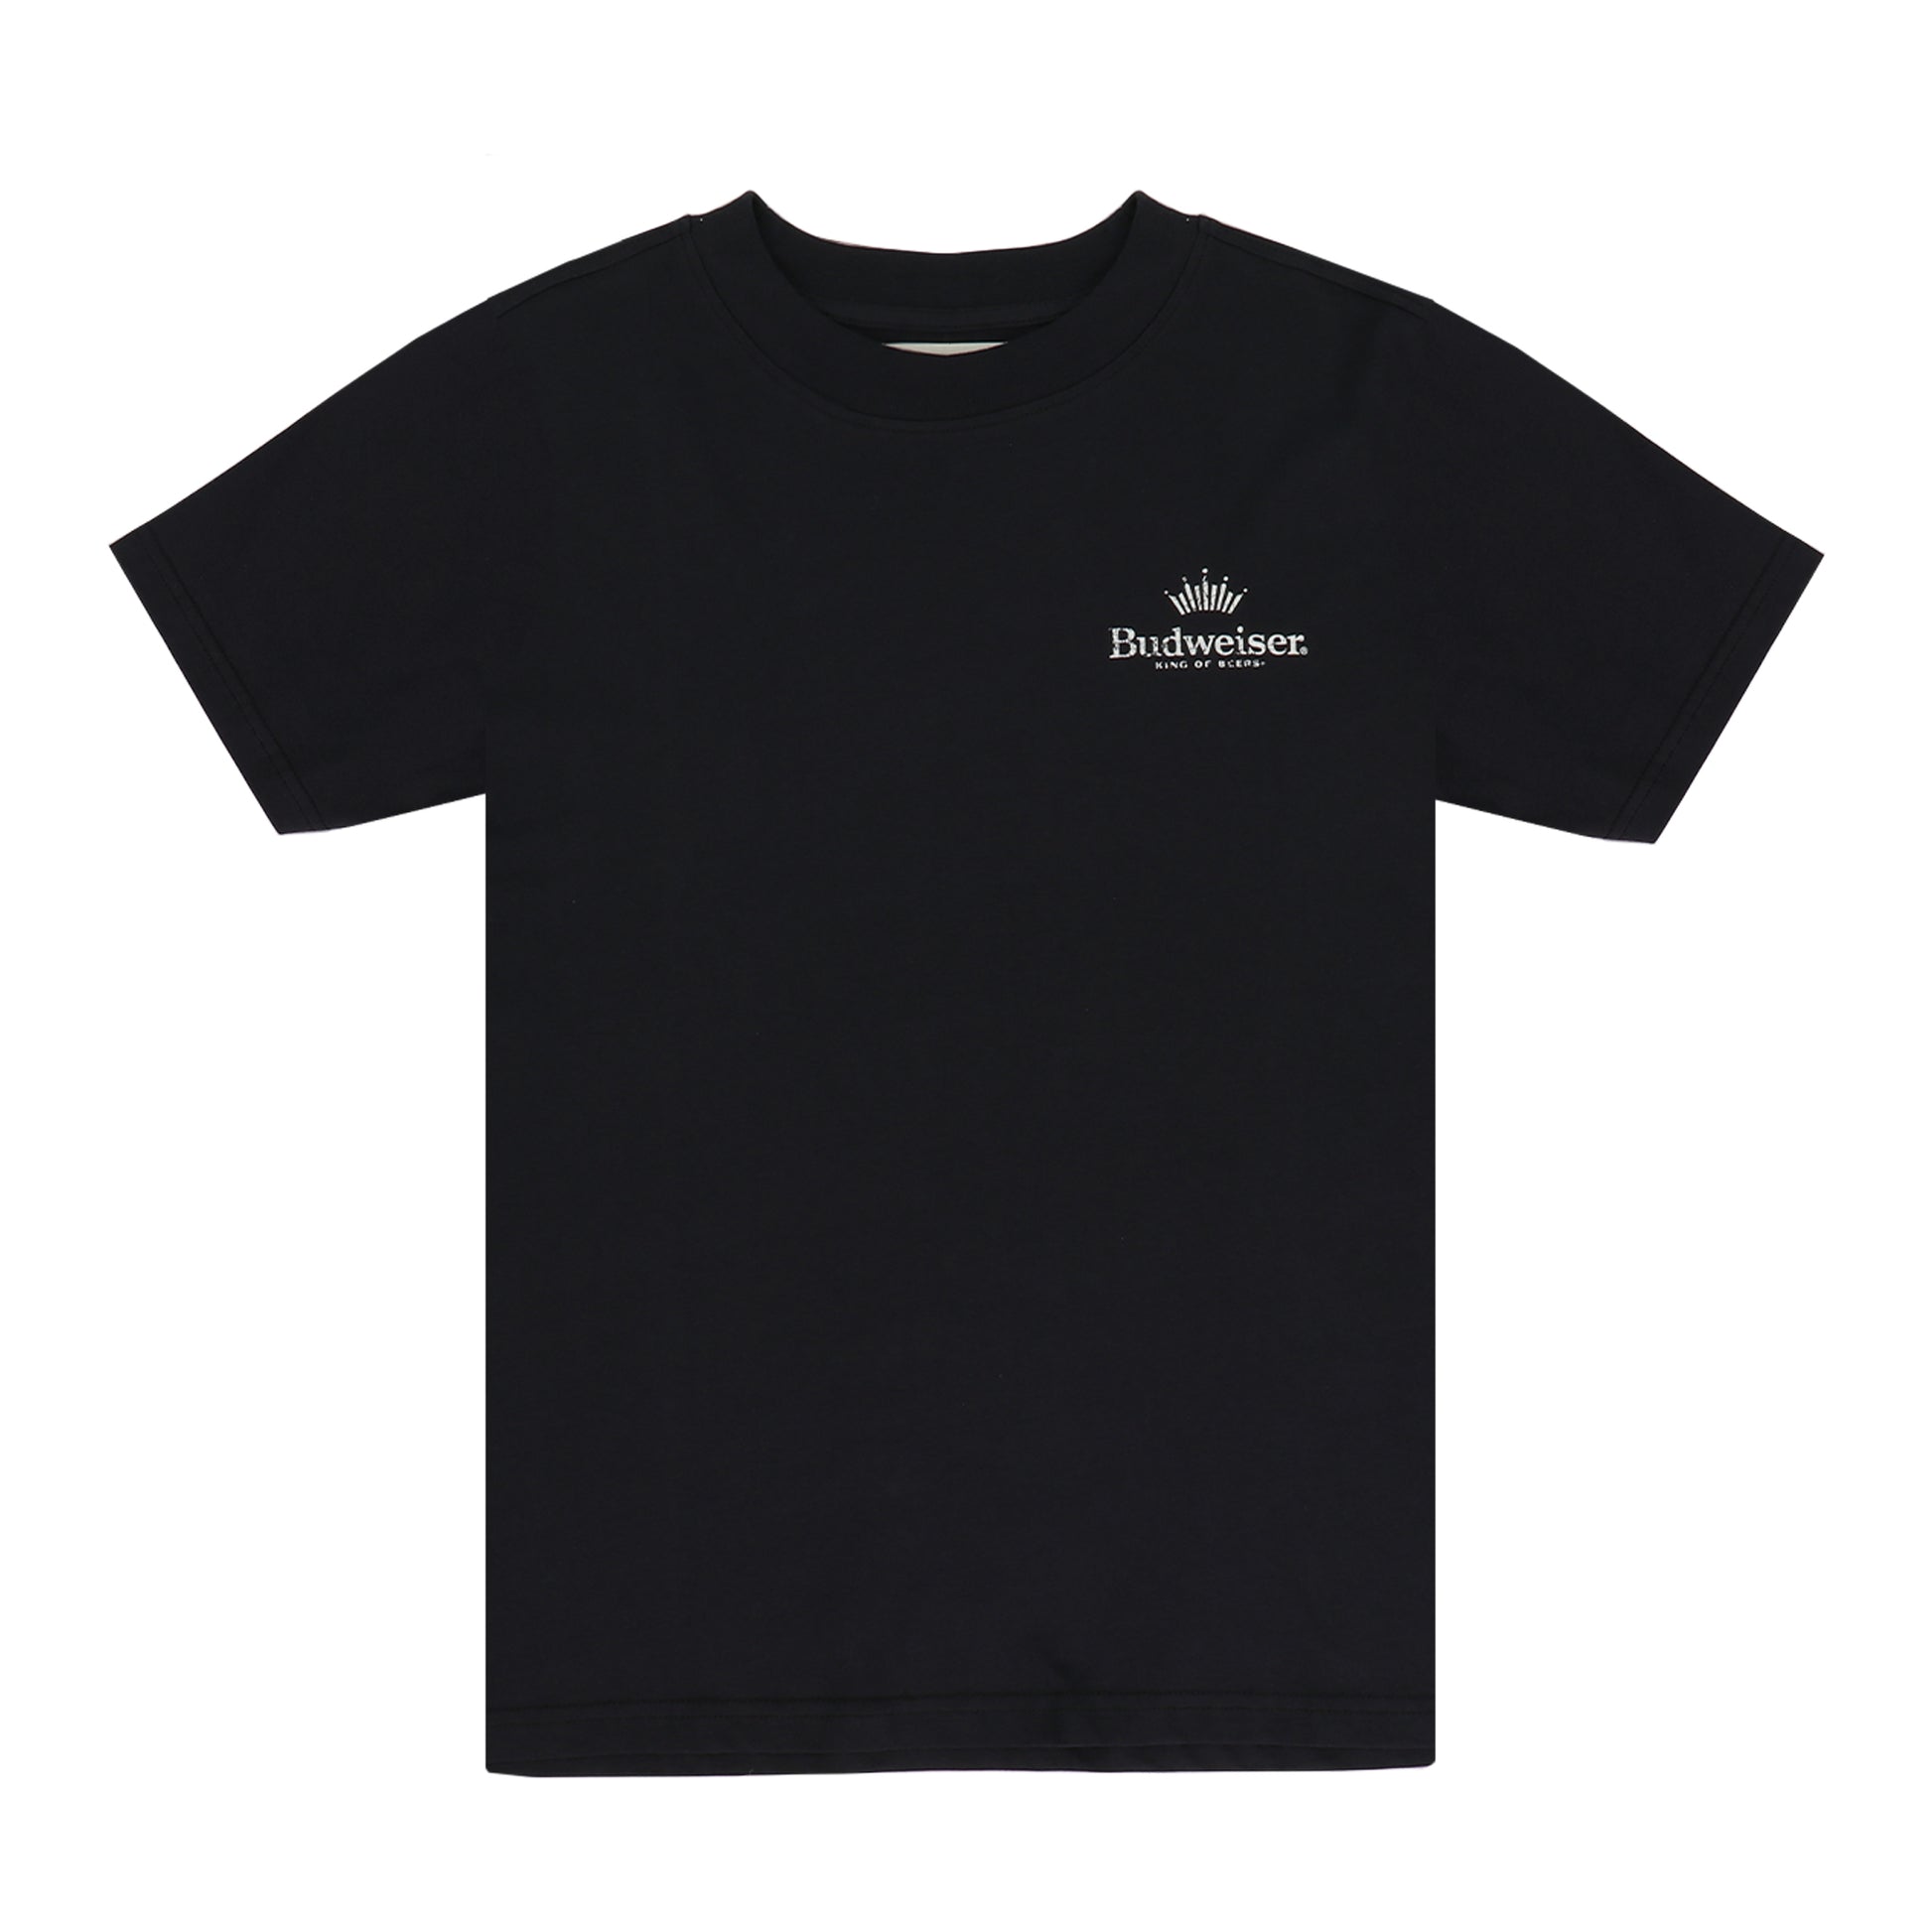 Front view of Budweiser x PacSun "King of Beers" Black Shirt